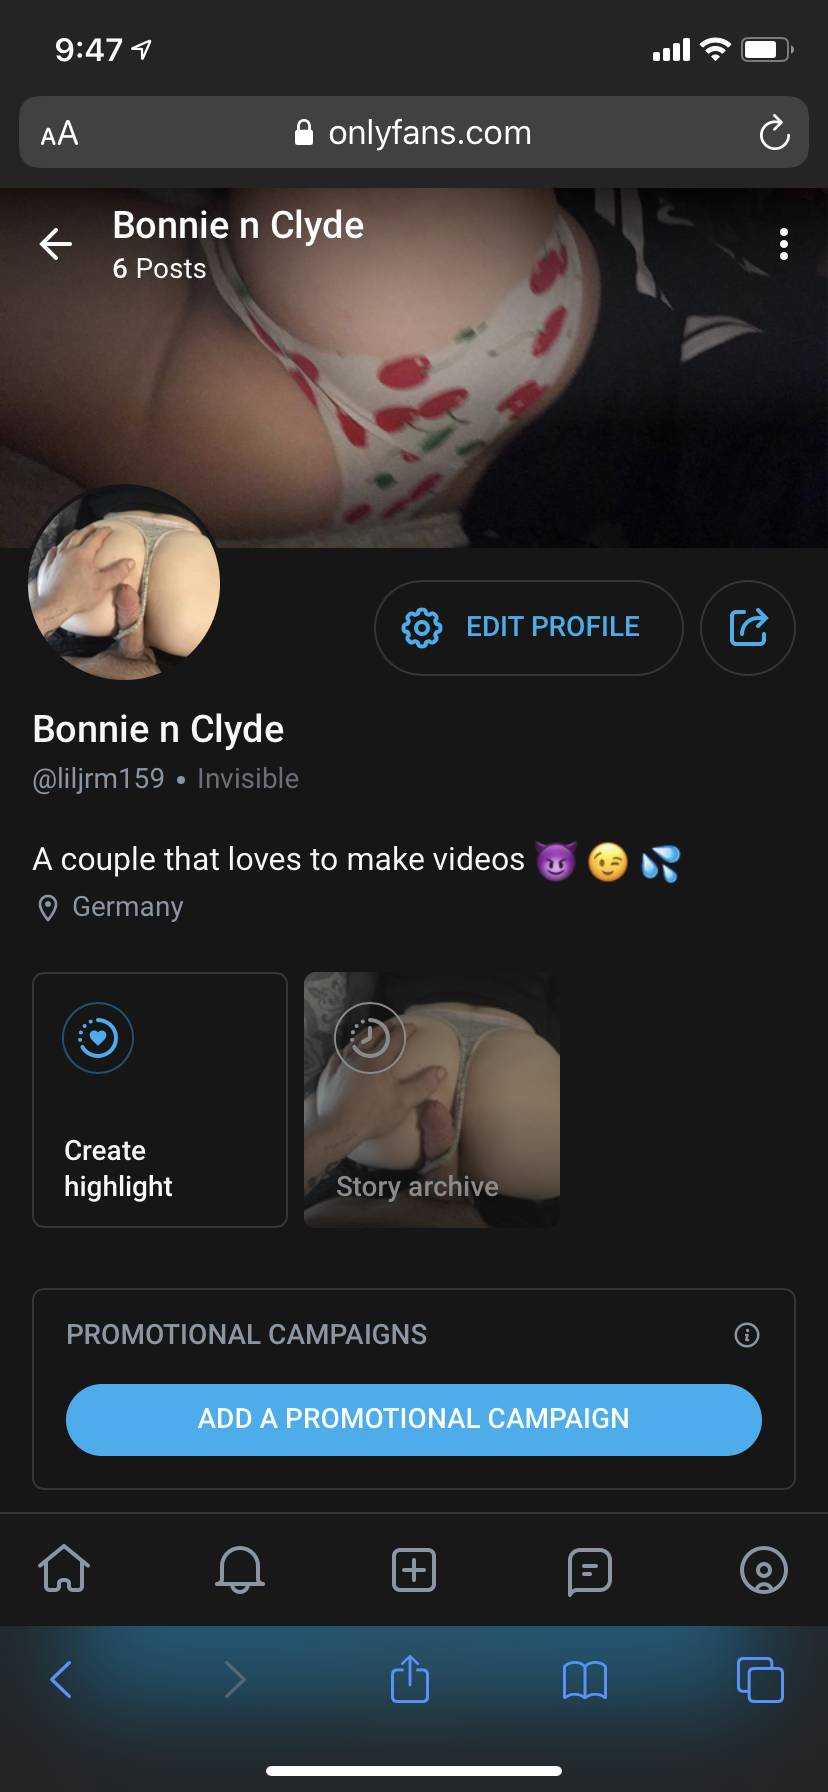 Photo by Bonnie n clyde with the username @liljman58, posted on August 26, 2020. The post is about the topic blowjob